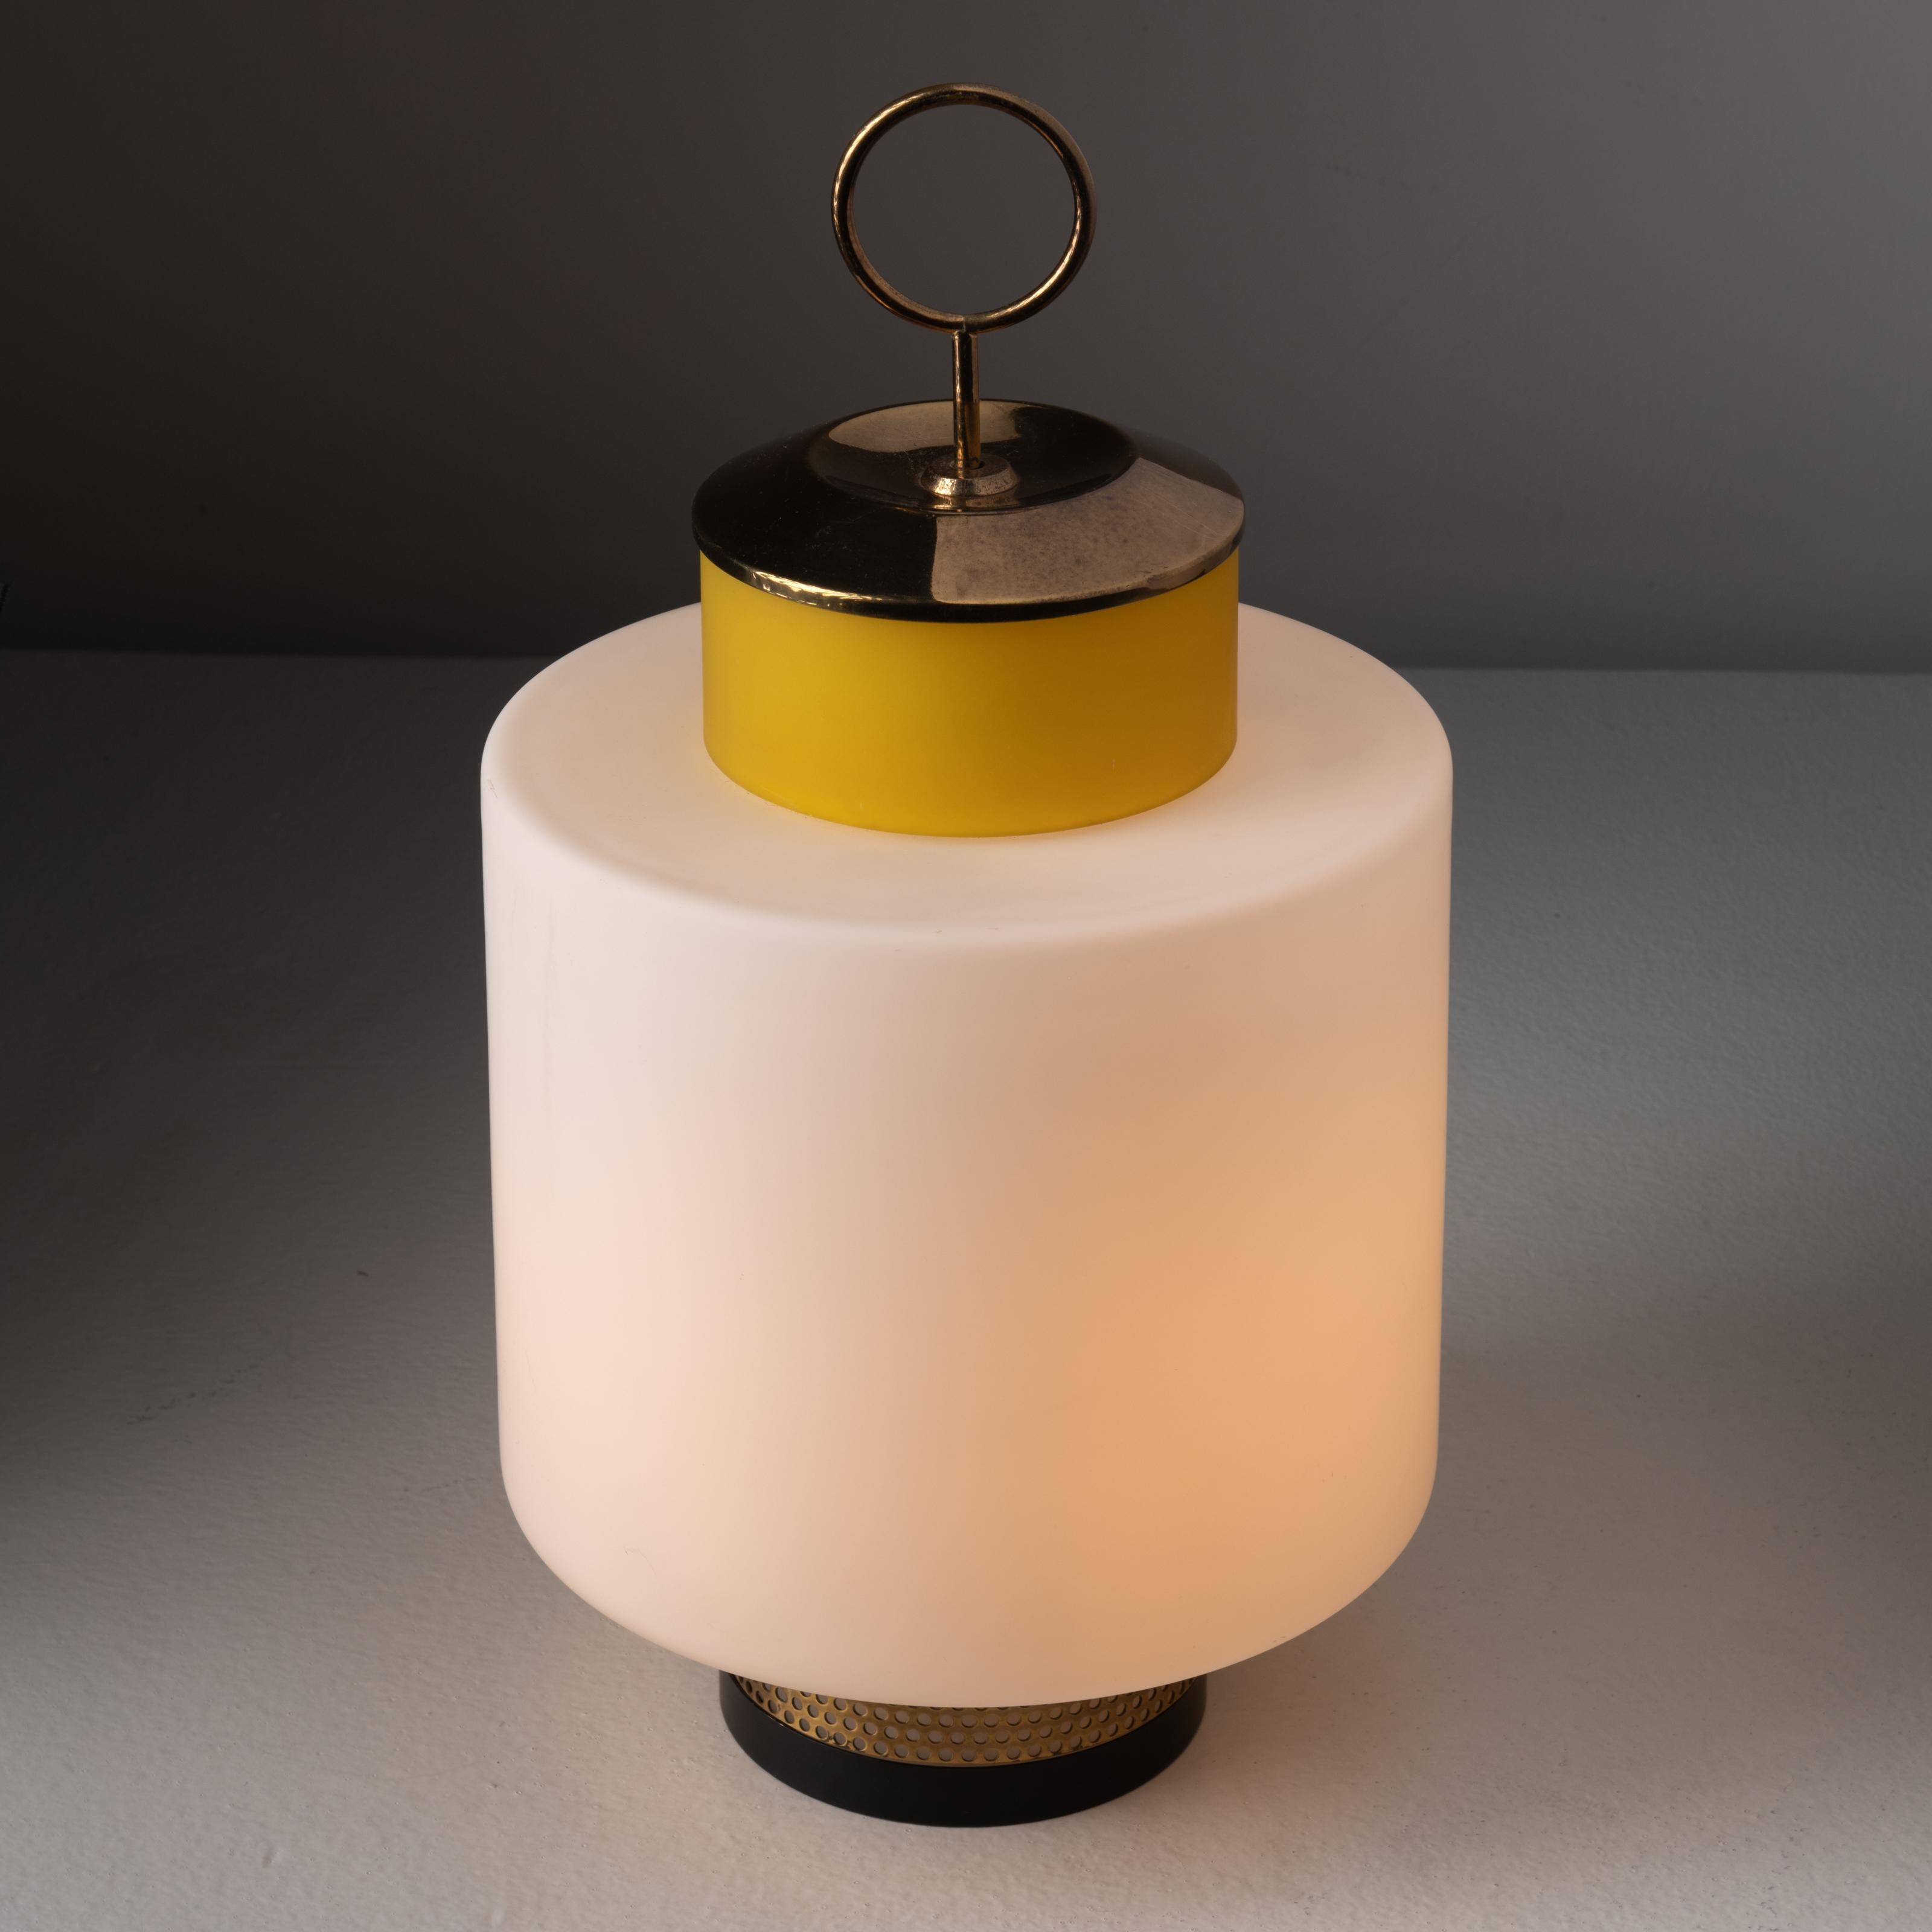 Pair of table lamps by Stilnovo. Manufactured in Italy, circa 1950s. Lantern style lamps consist of opal glass main diffusers with yellow colored accent glass above. Perforated aged brass bottom housing and a brass loop on top for an added feature.